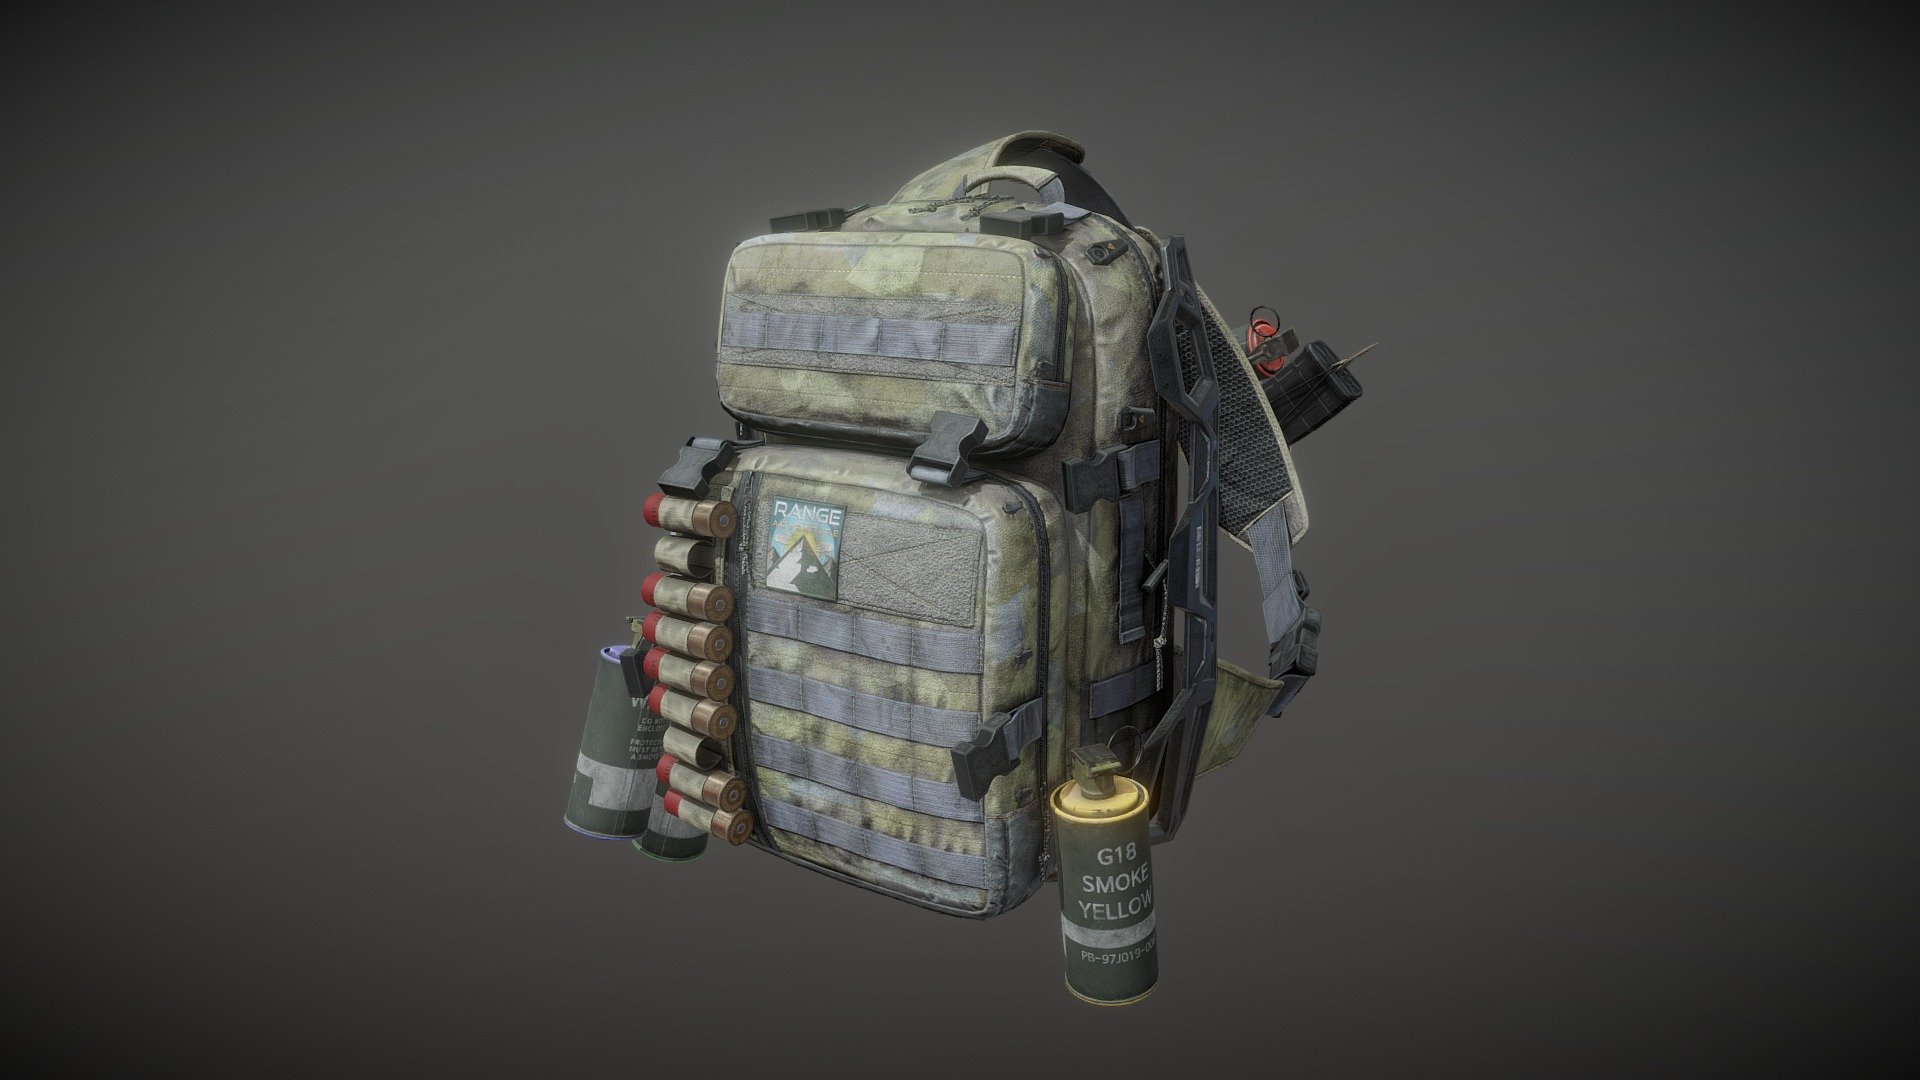 Tactical Sling BackPack lowpoly modeling.
This modeling is optimized for PBR 3d model